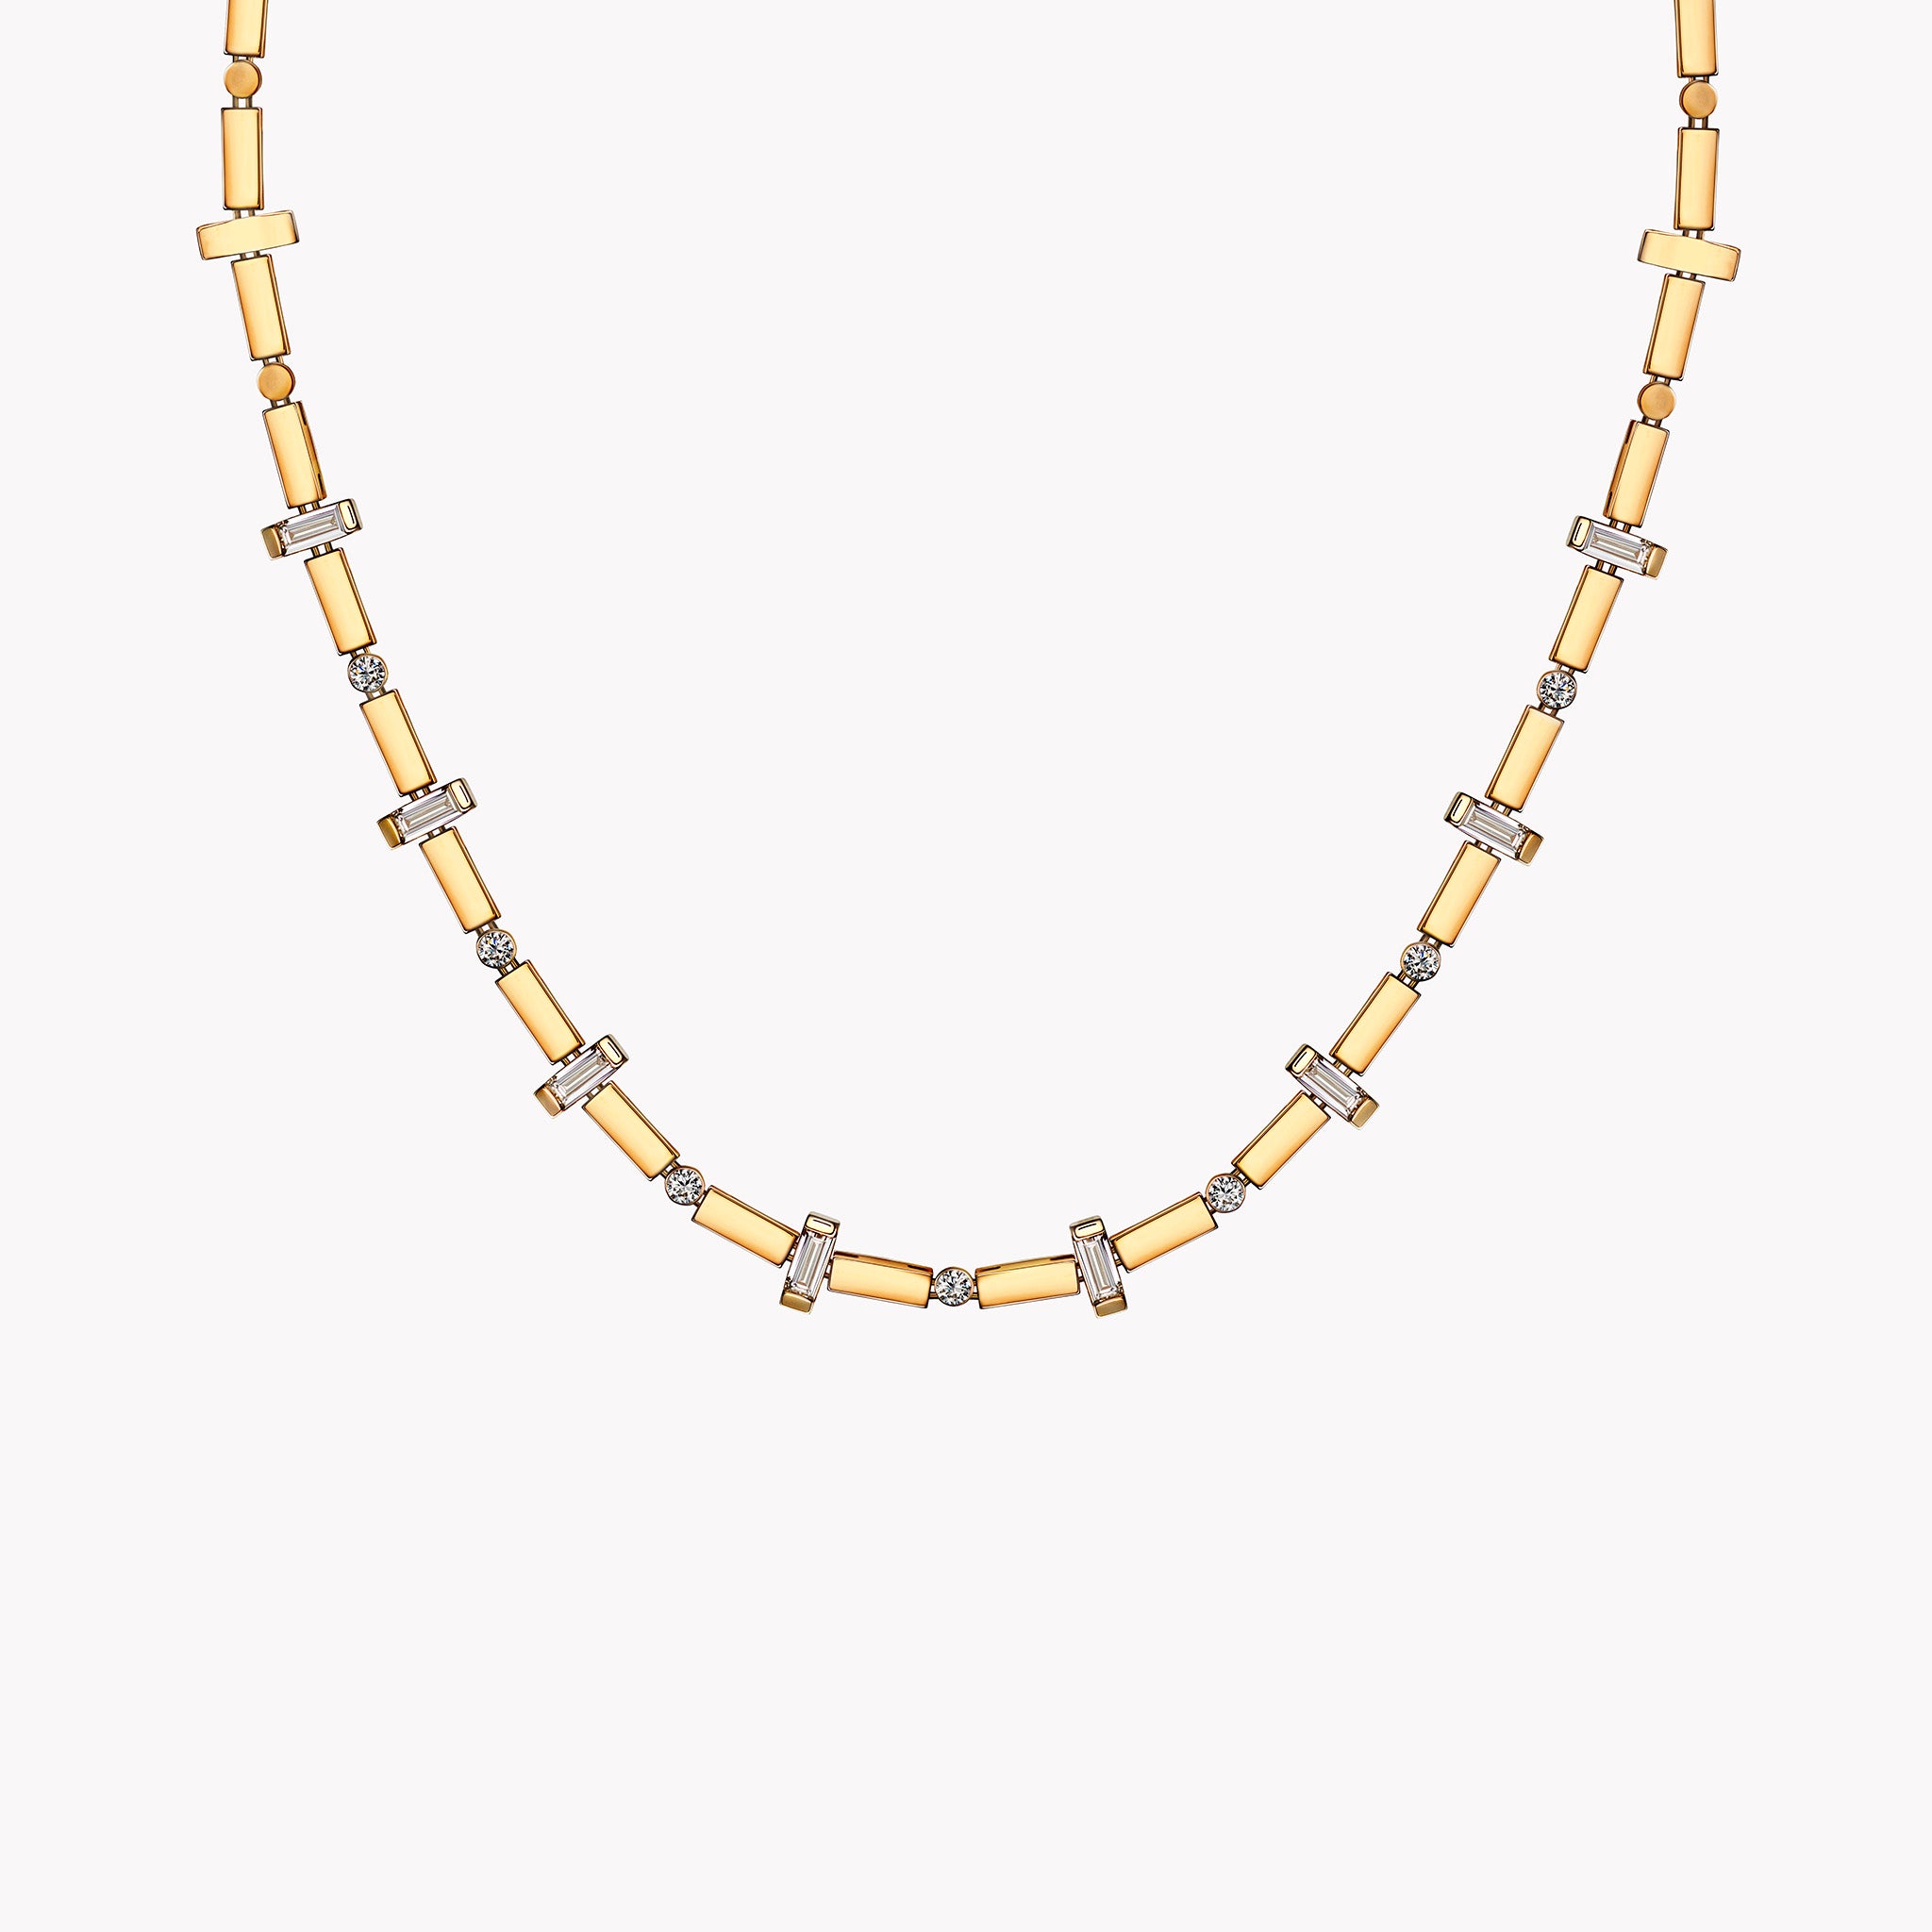 SCATTERED GOLD BAR AND DIAMOND TENNIS NECKLACE